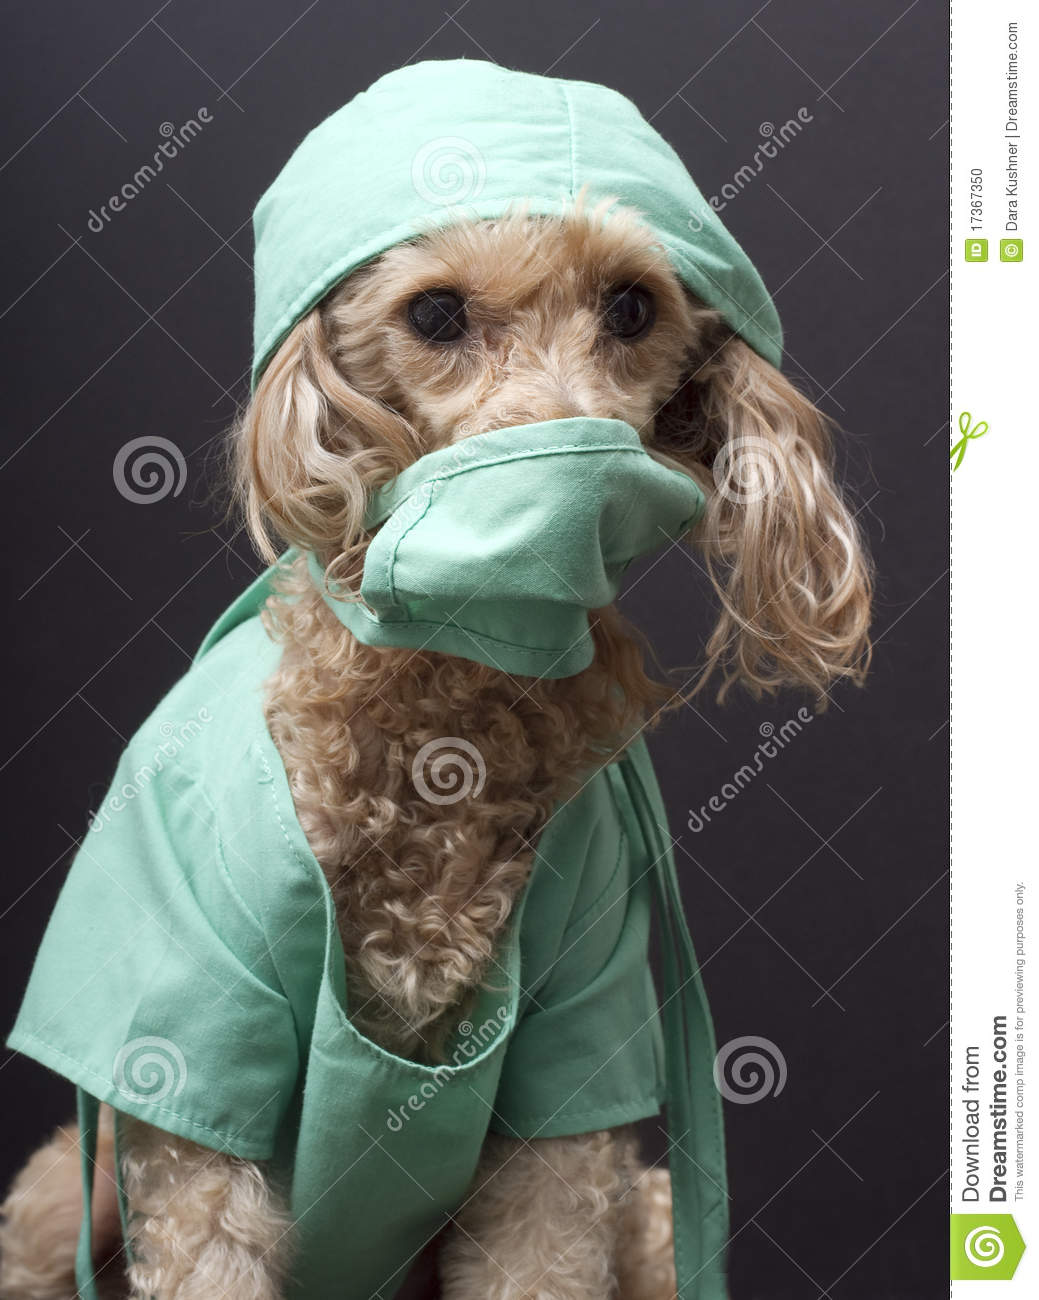 Dog Wearing Medical Scrubs And A Mask Isolated On A Black Background